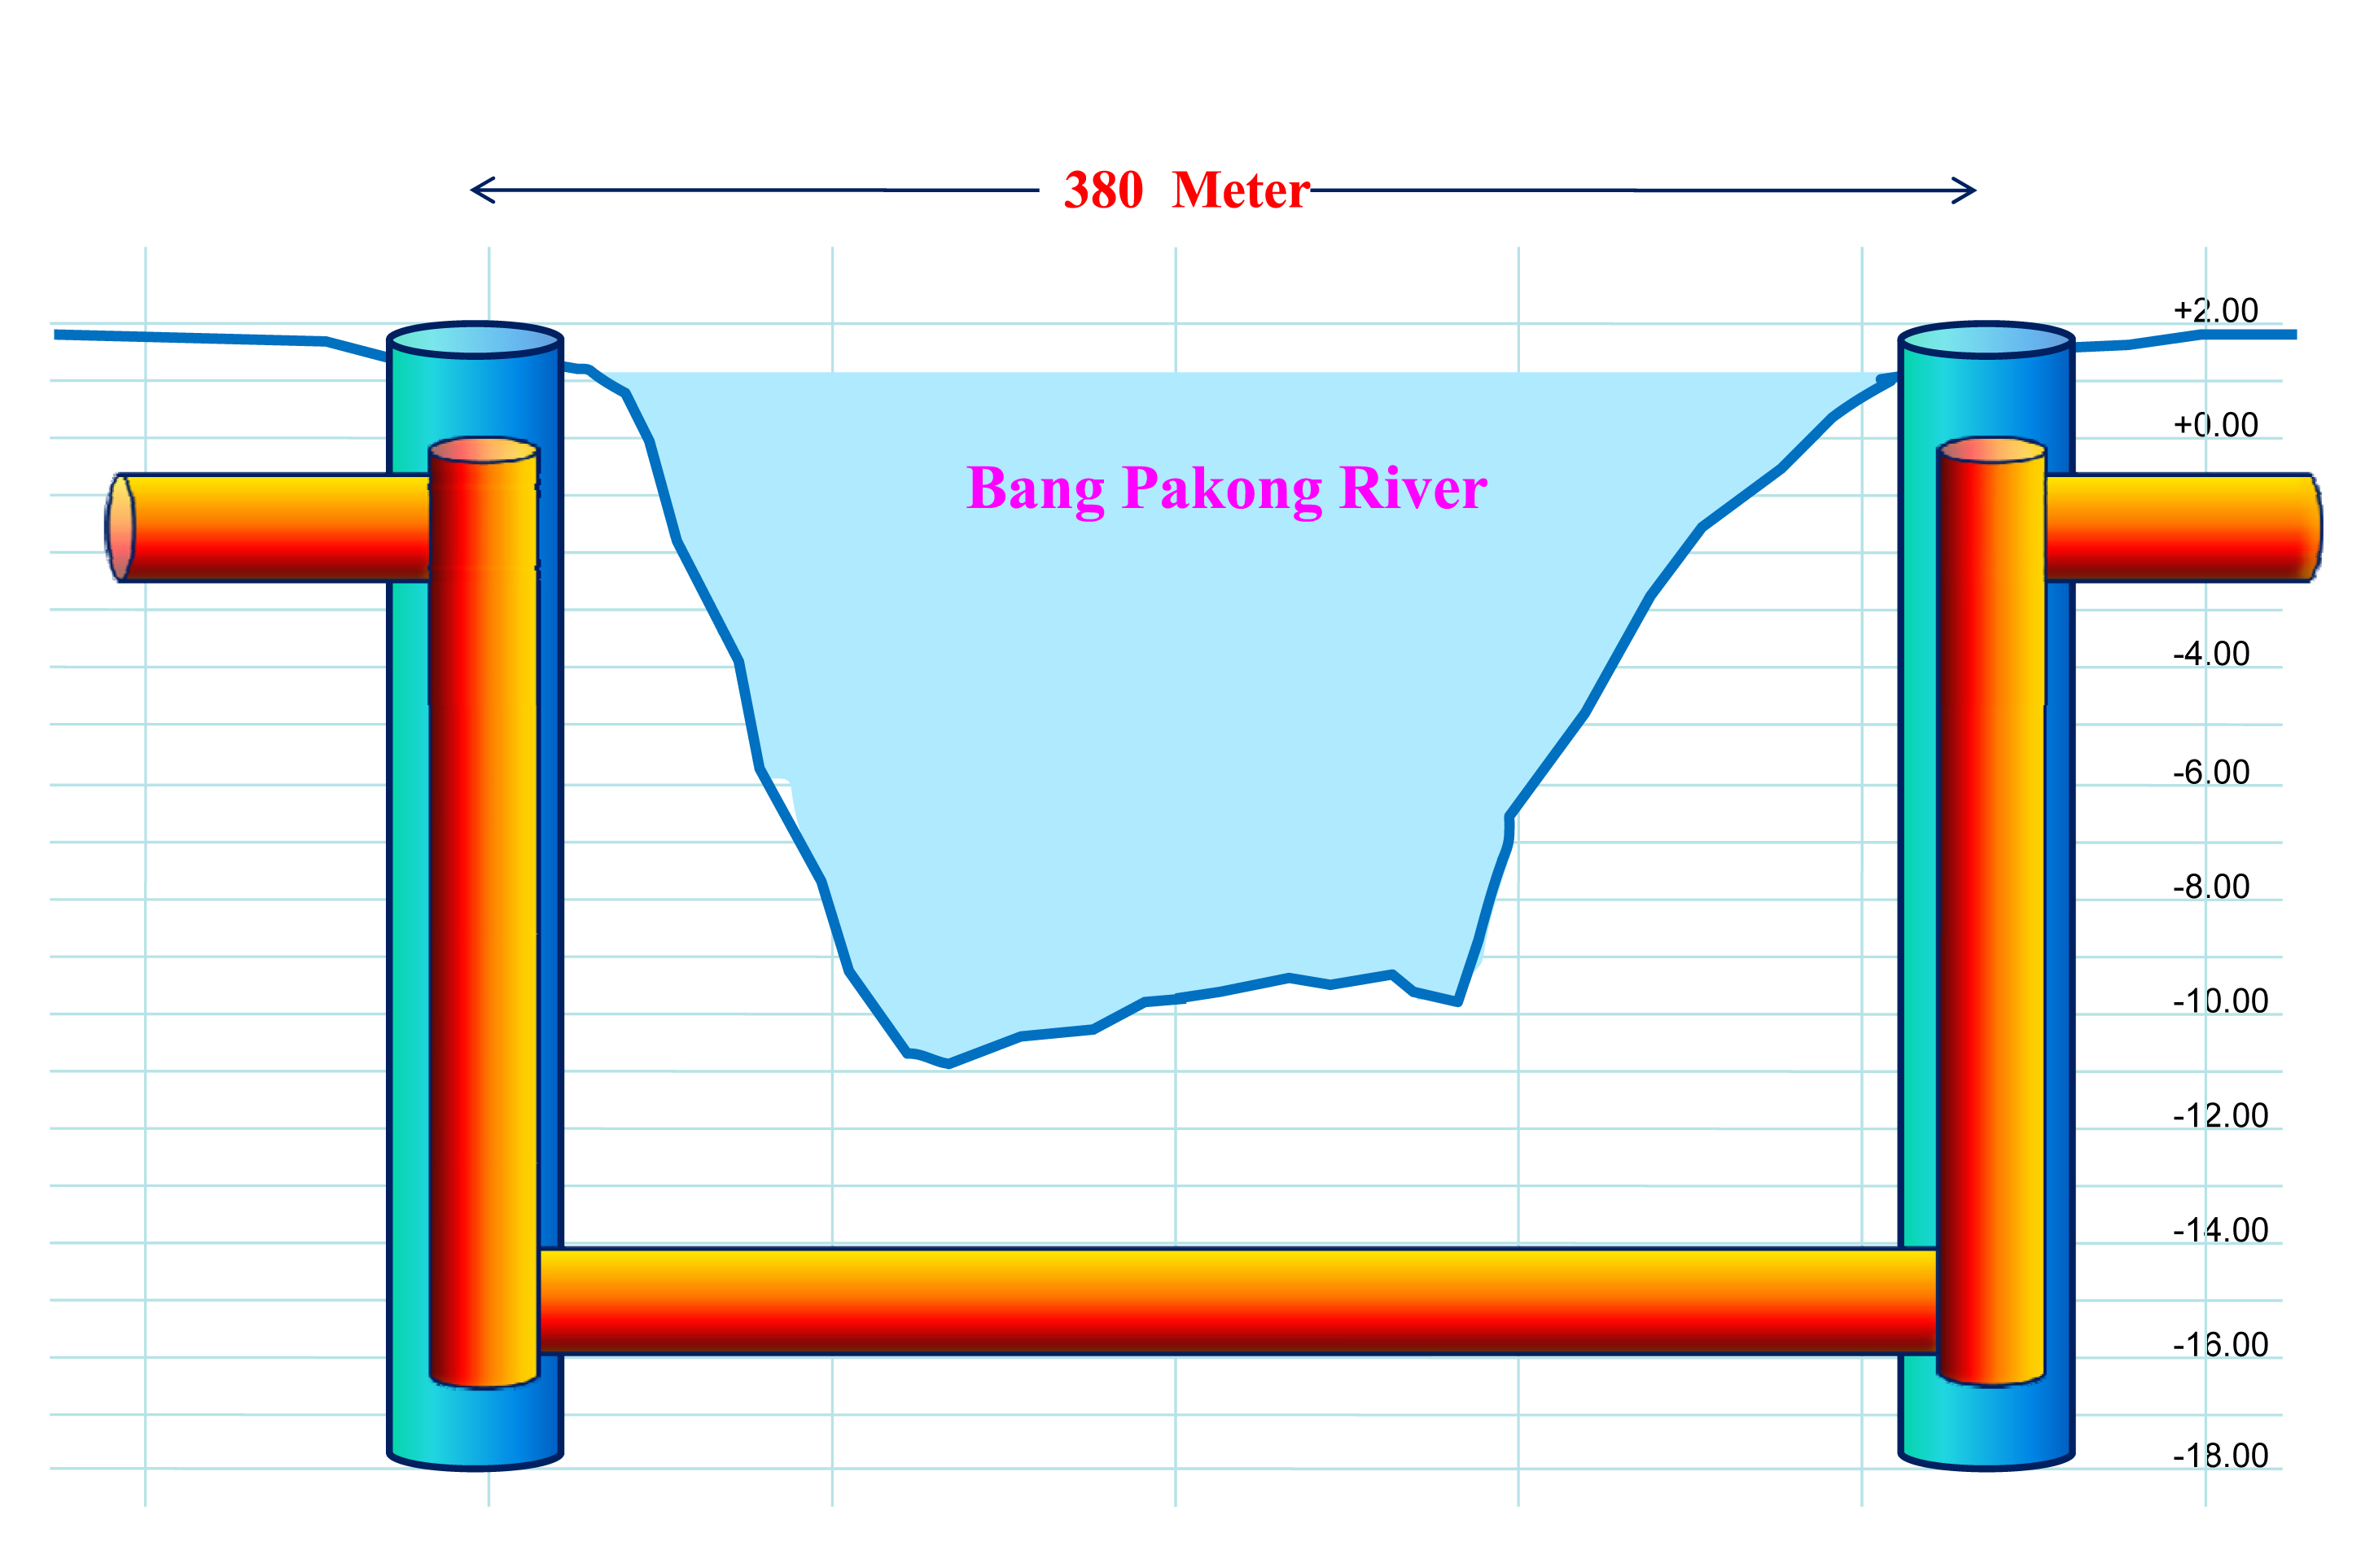 The pipe jacking works under the Bang PaKong River